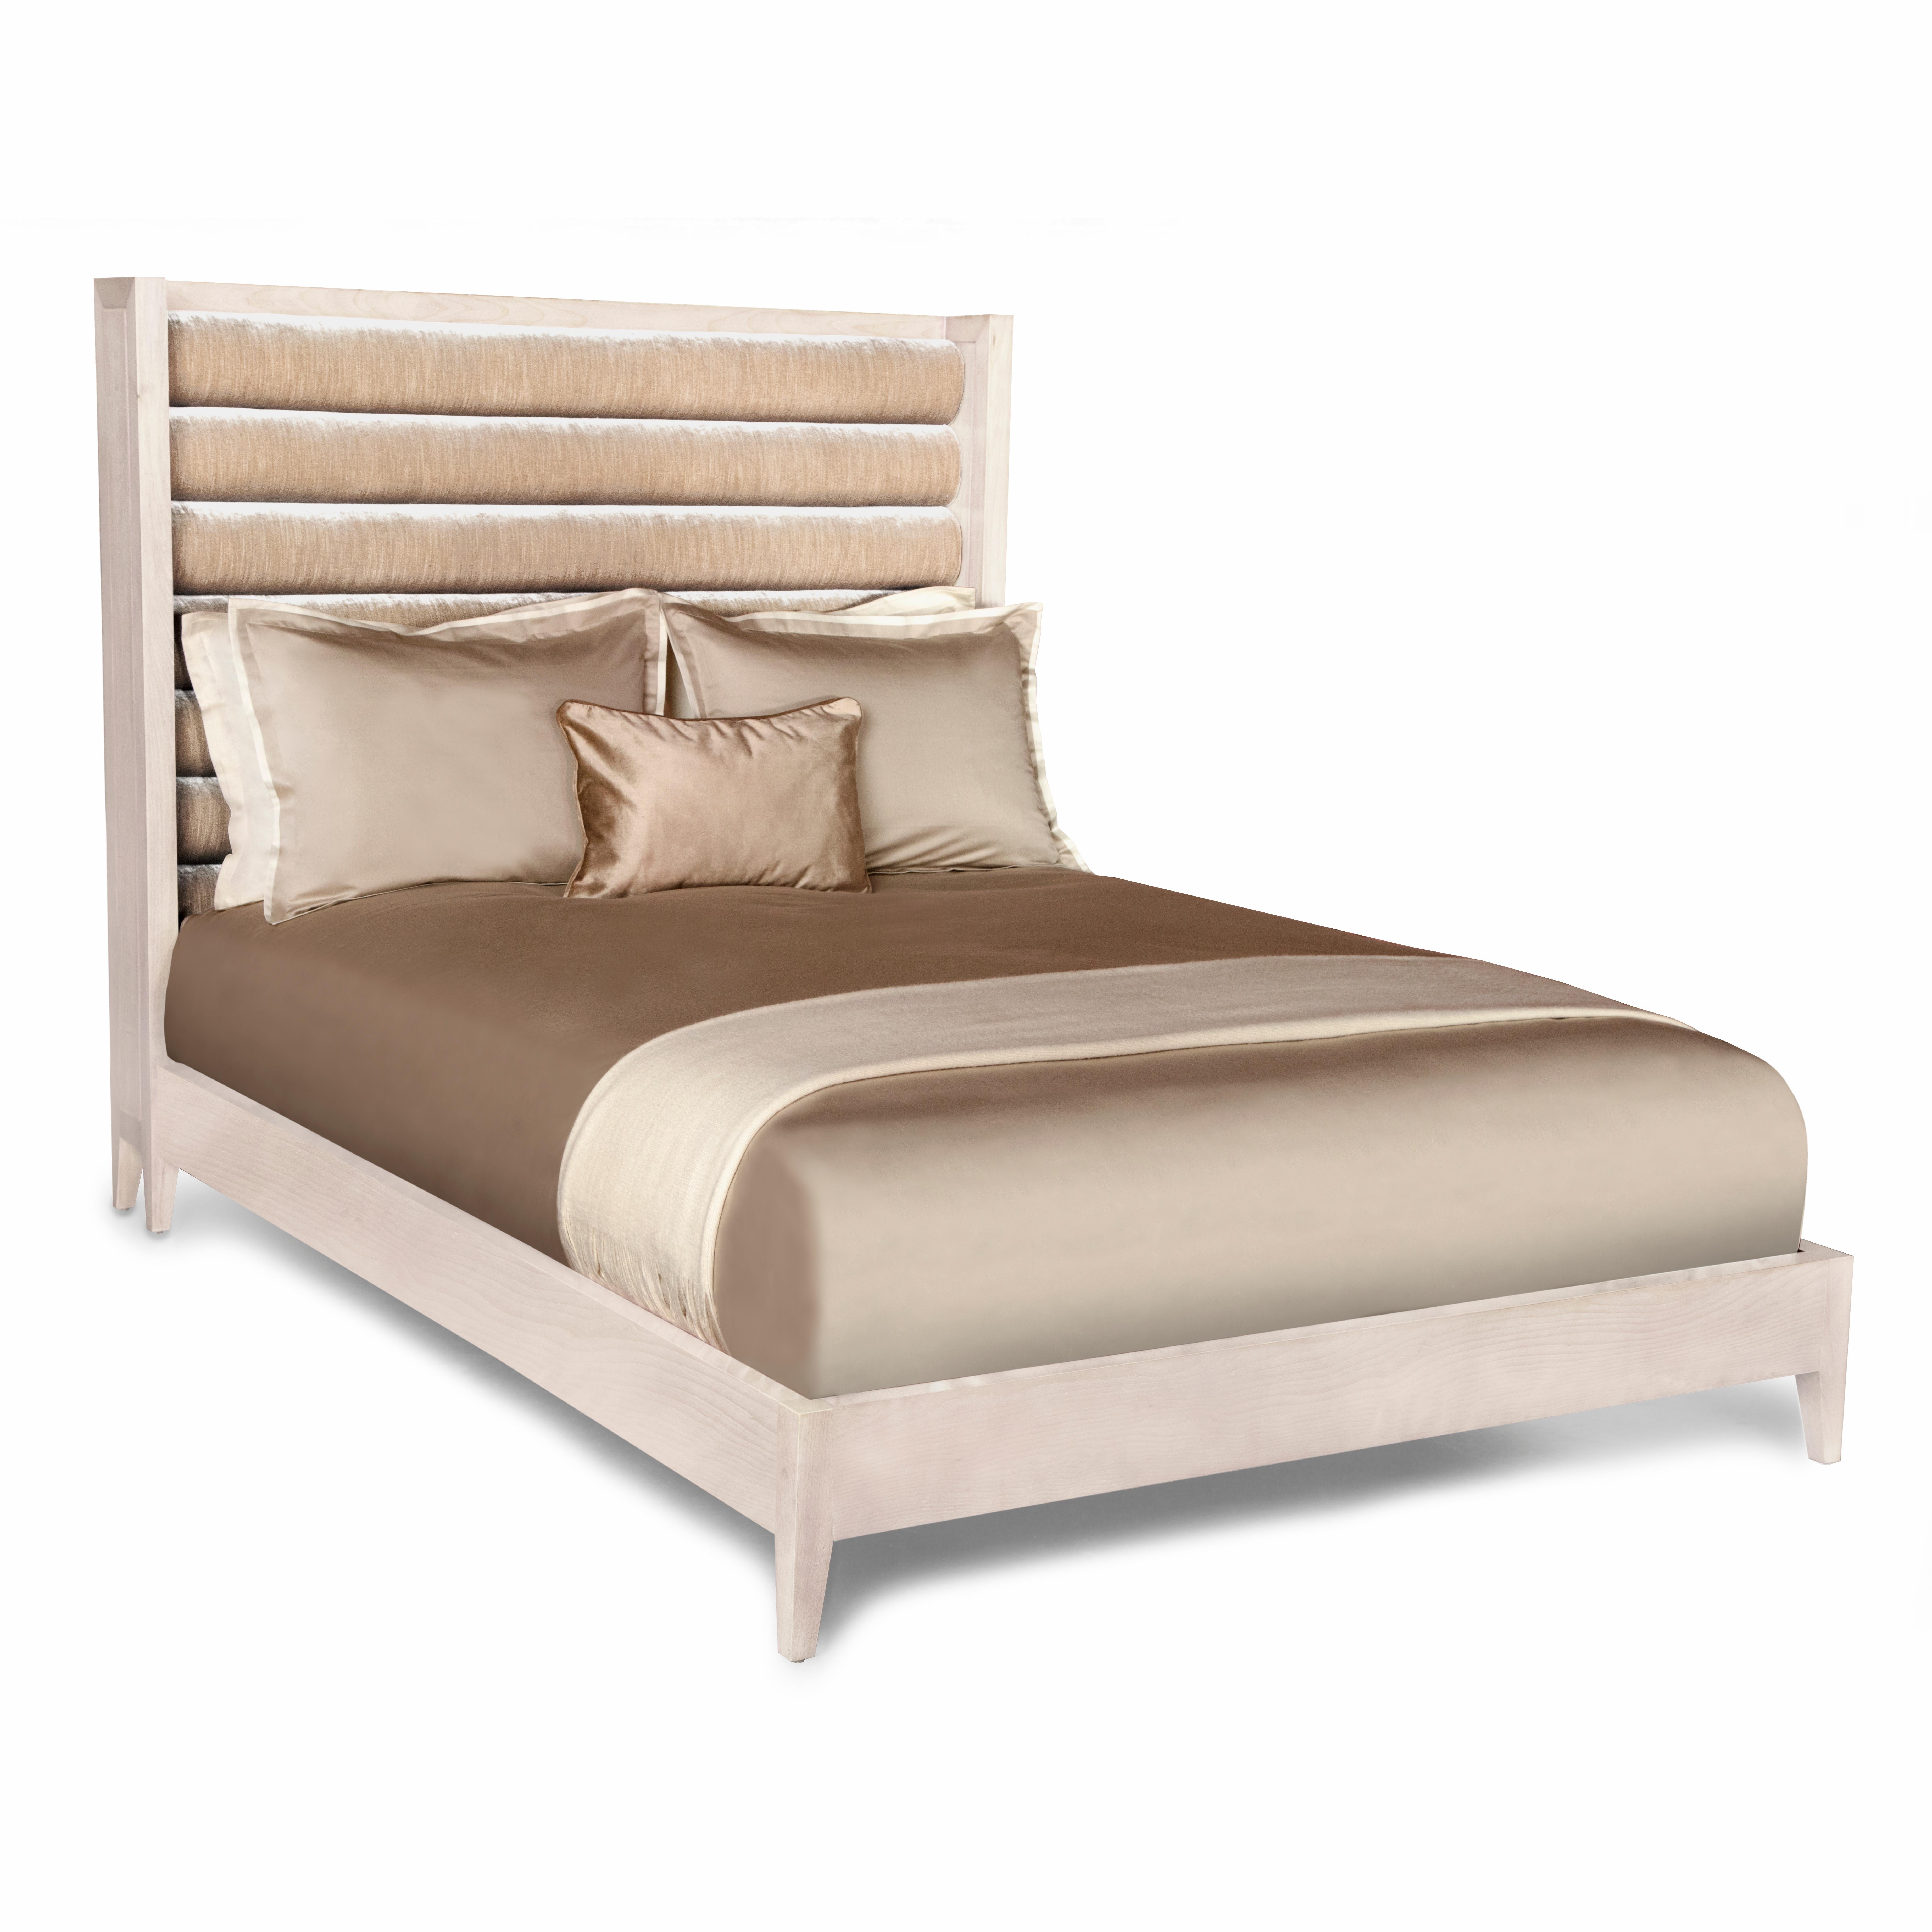 The Crawford bed is a stylish and chic bedroom mainstay. With its horizontal channel tufted headboard, tapered legs, and blush stained wood, this bed provides luxurious comfort while exuding sophistication, warmth, and elegance. The wood is sanded,